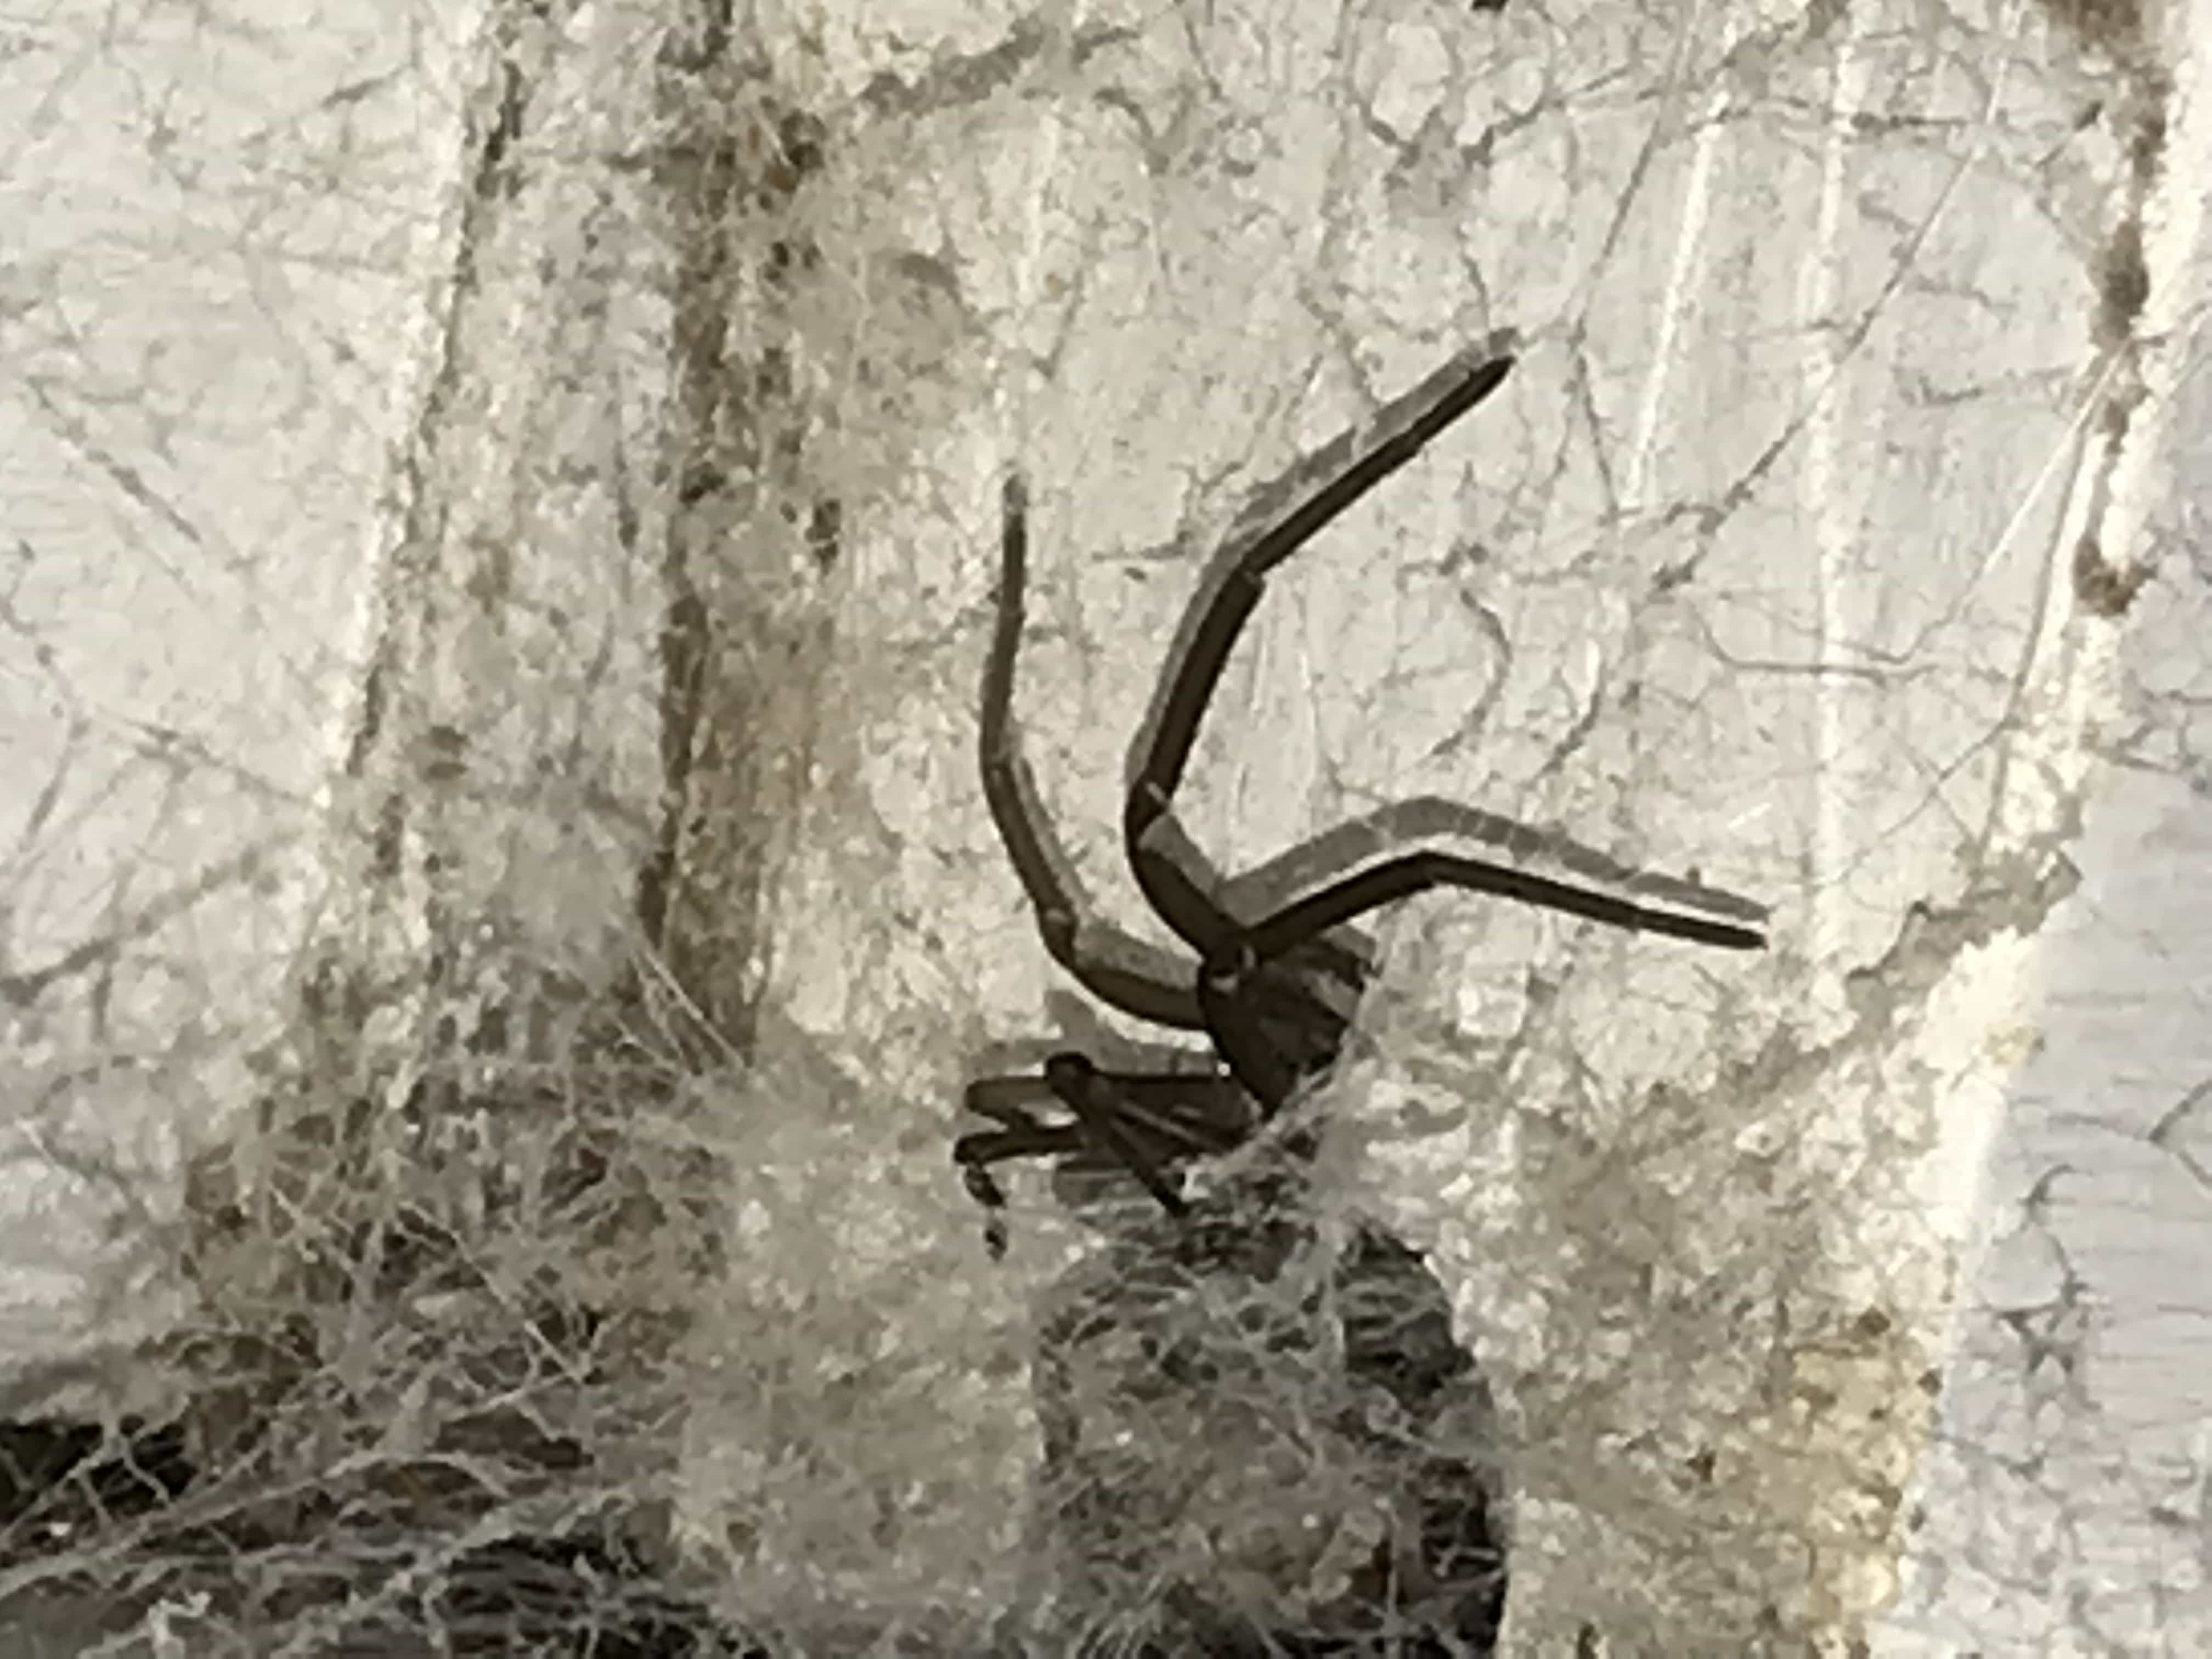 Picture of Kukulcania hibernalis (Southern House Spider) - Lateral,Webs